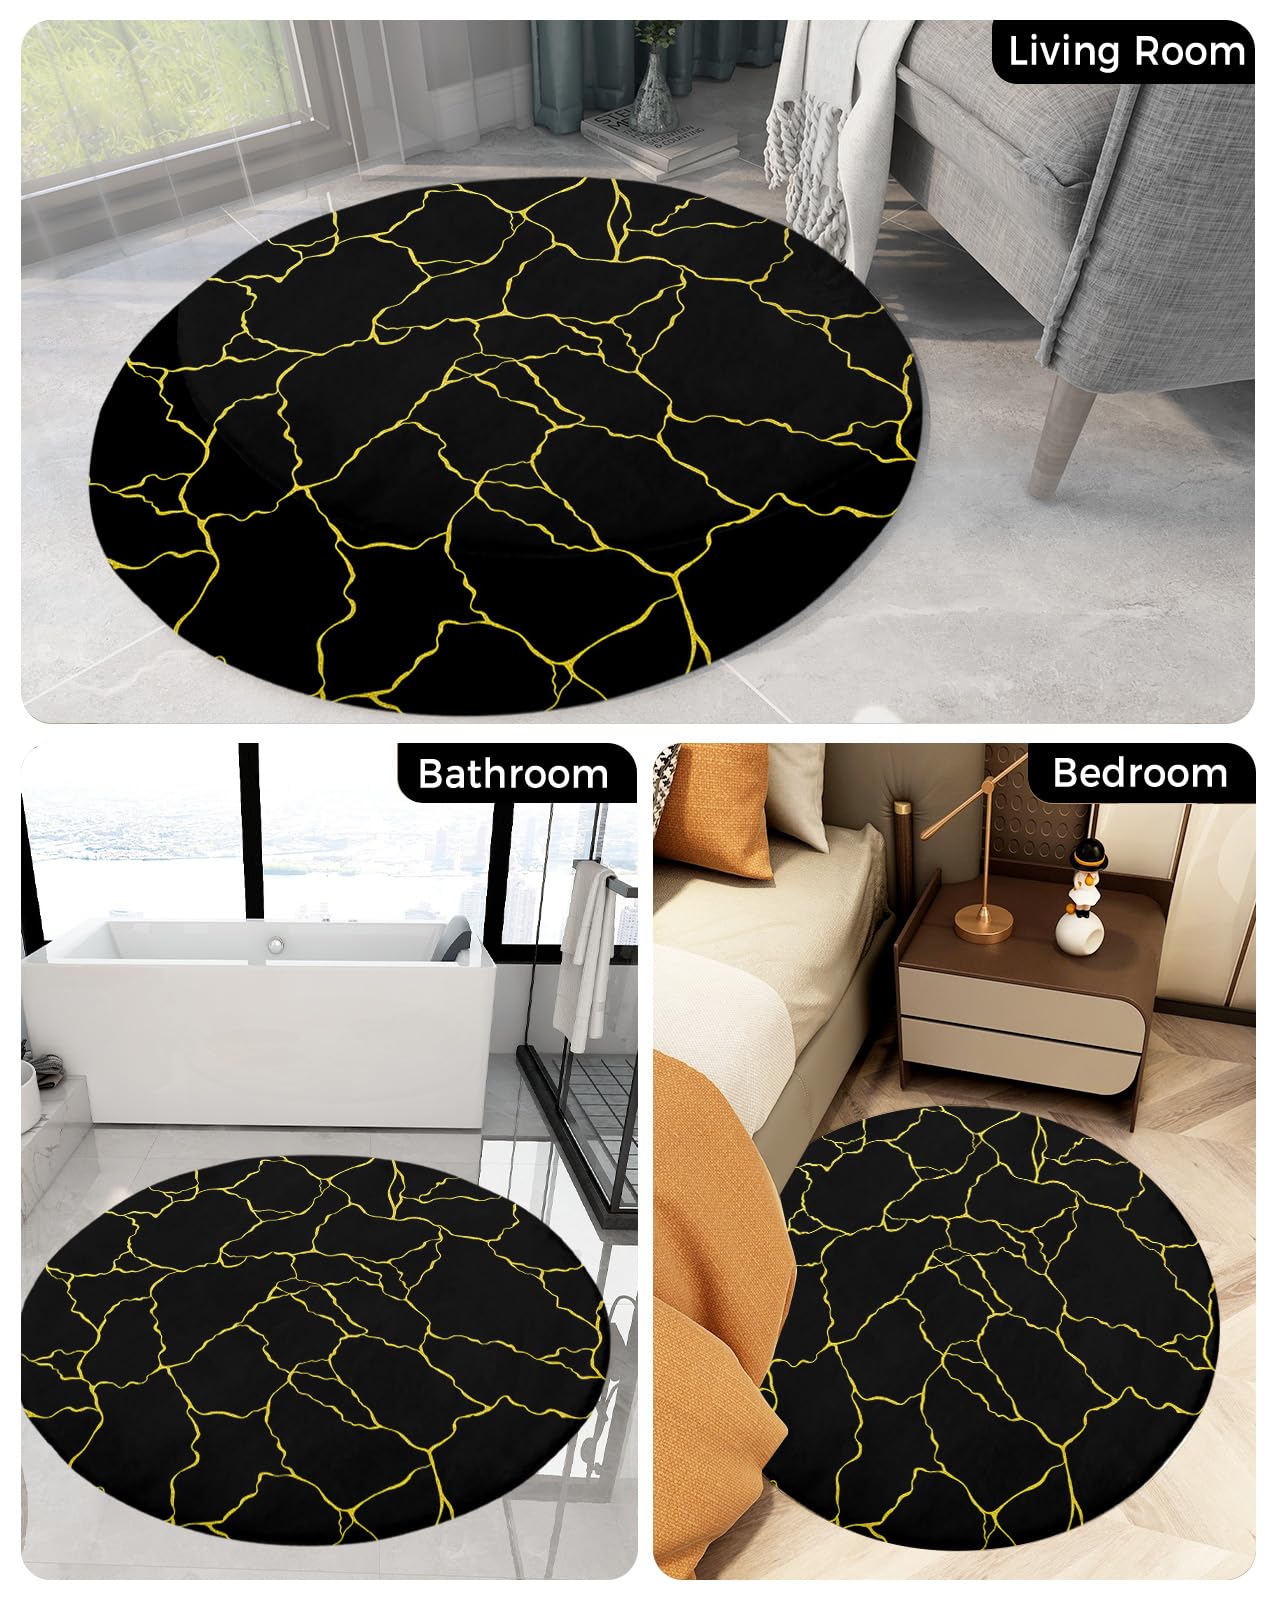 Black Gold Fluffy Round Area Rug Carpets 4ft, Plush Shaggy Carpet Soft Circular Rugs, Non-Slip Fuzzy Accent Floor Mat for Living Room Bedroom Nursery Home Decor Modern Geometric Abstract Art